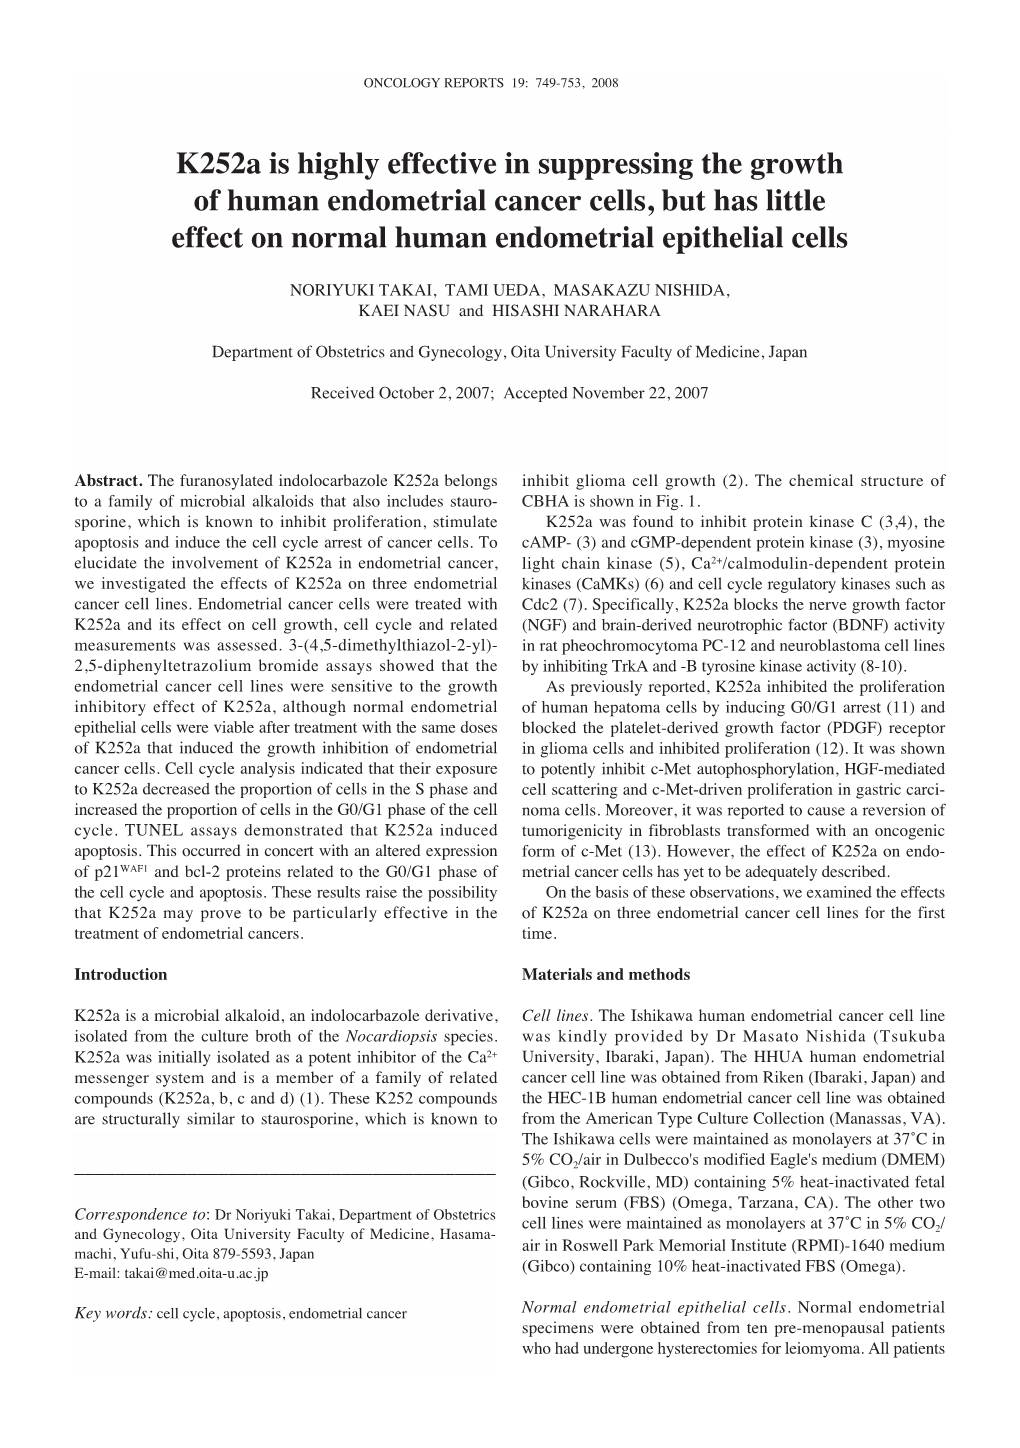 K252a Is Highly Effective in Suppressing the Growth of Human Endometrial Cancer Cells, but Has Little Effect on Normal Human Endometrial Epithelial Cells